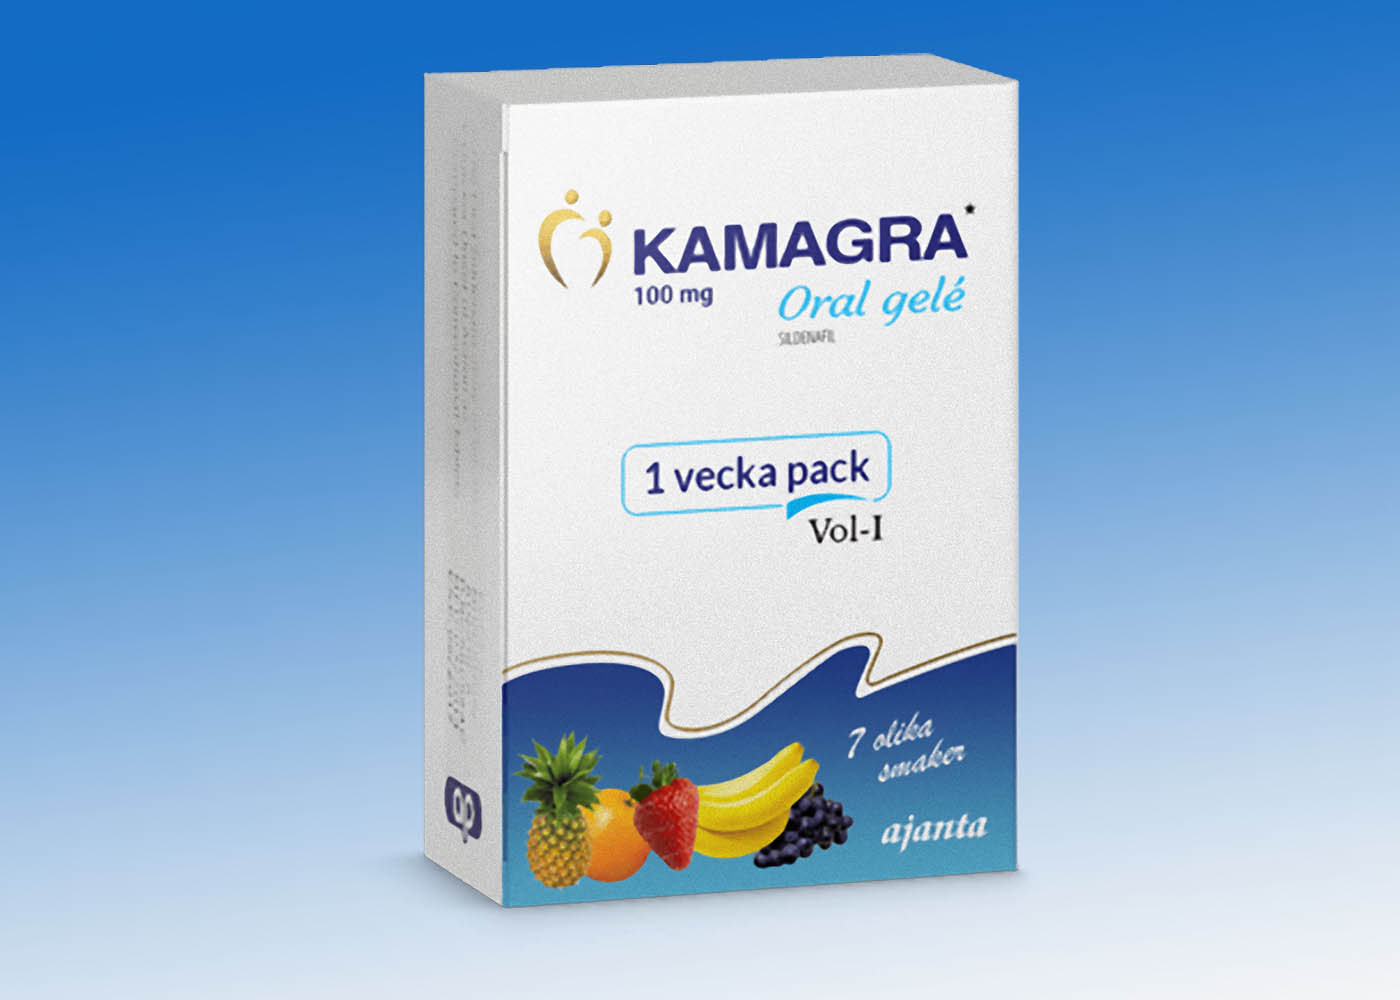 Find out how you can buy the best Kamagra supplements that work against erectile dysfunction post thumbnail image